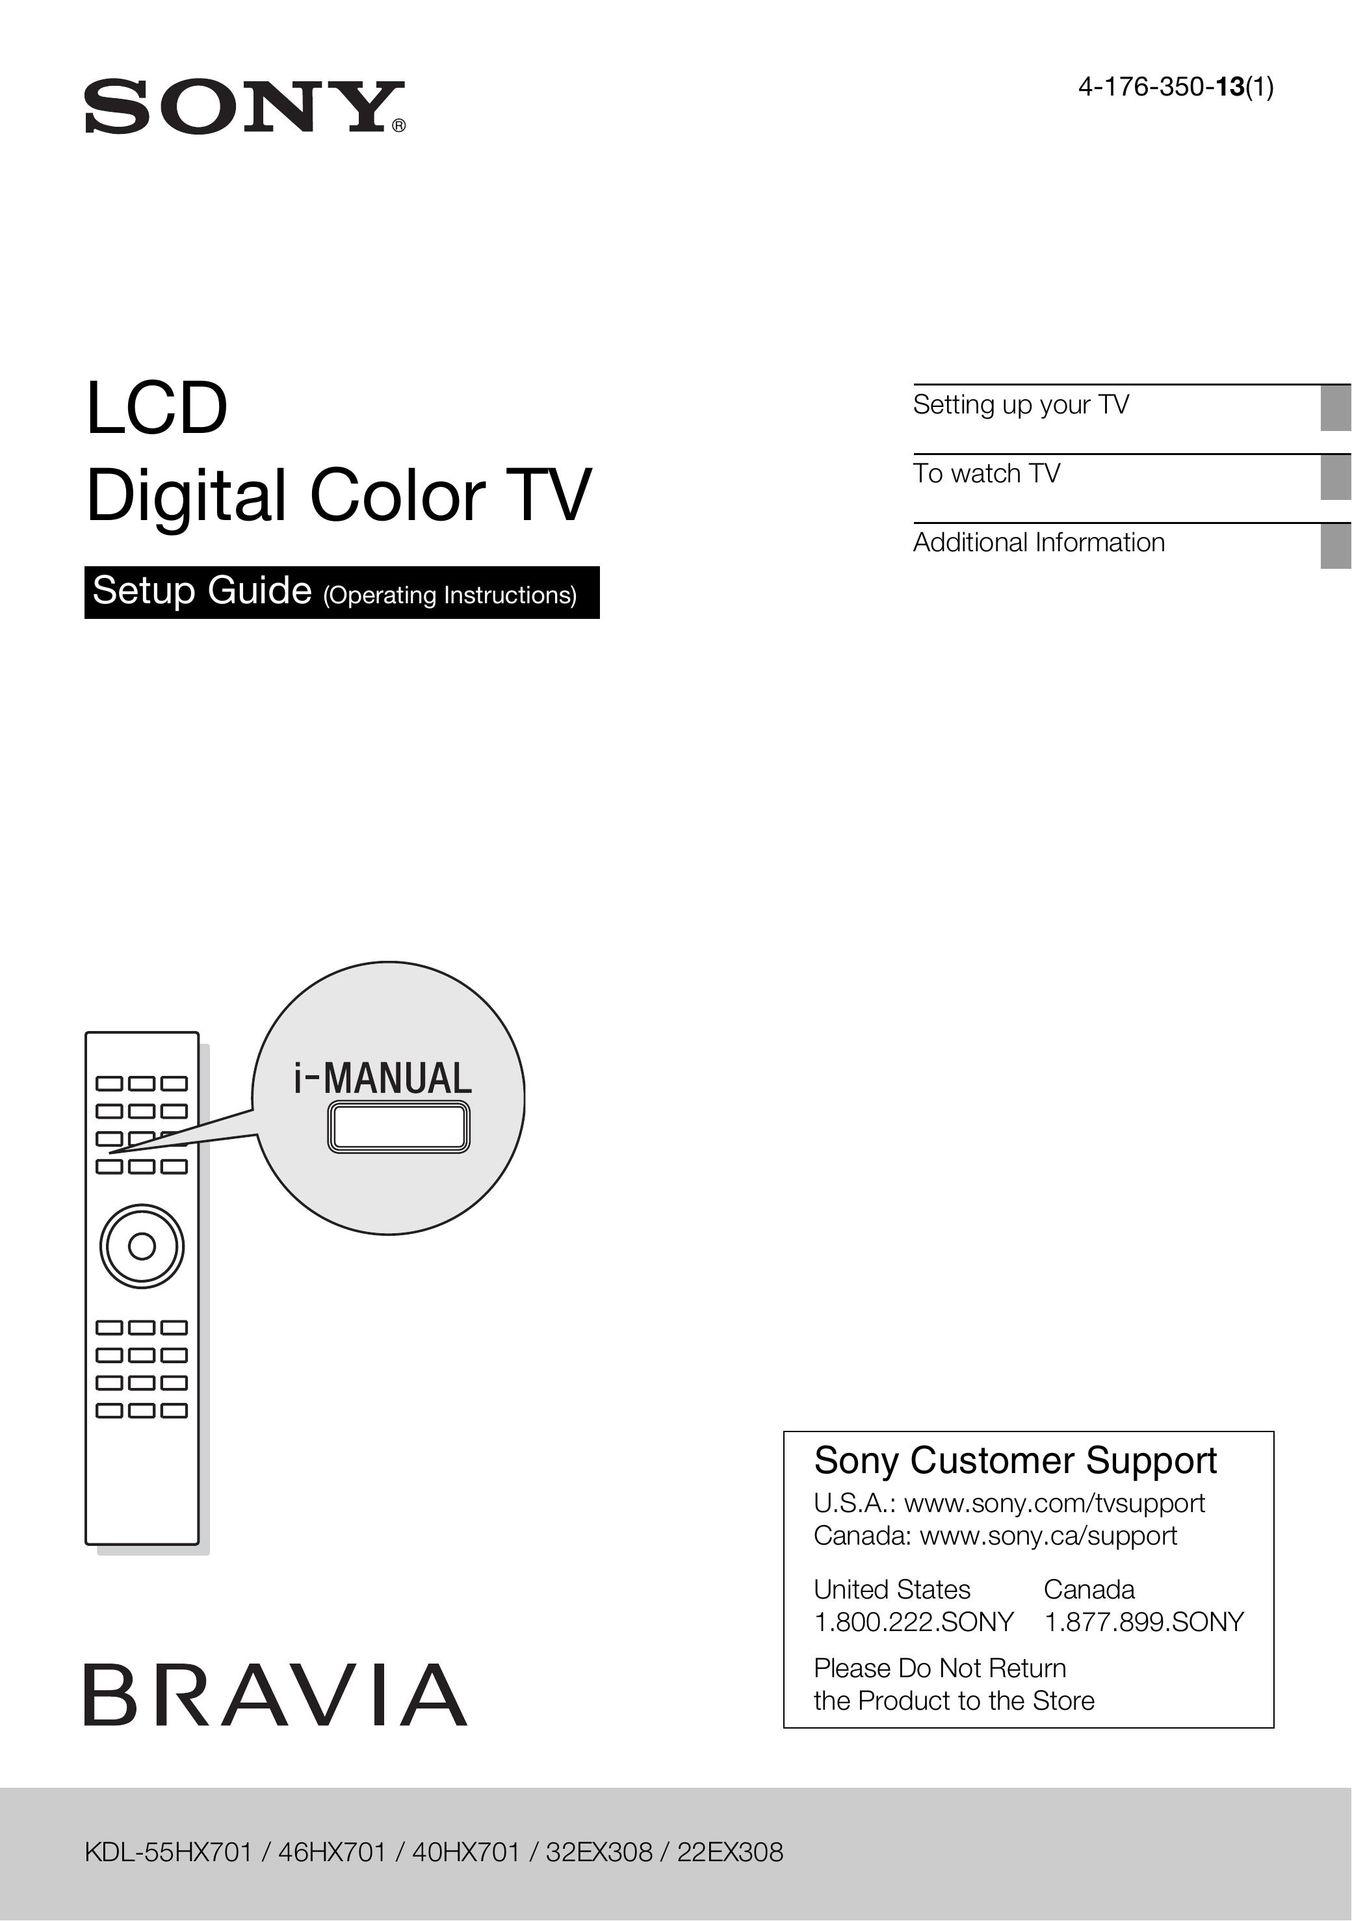 Sony 32EX308 CRT Television User Manual